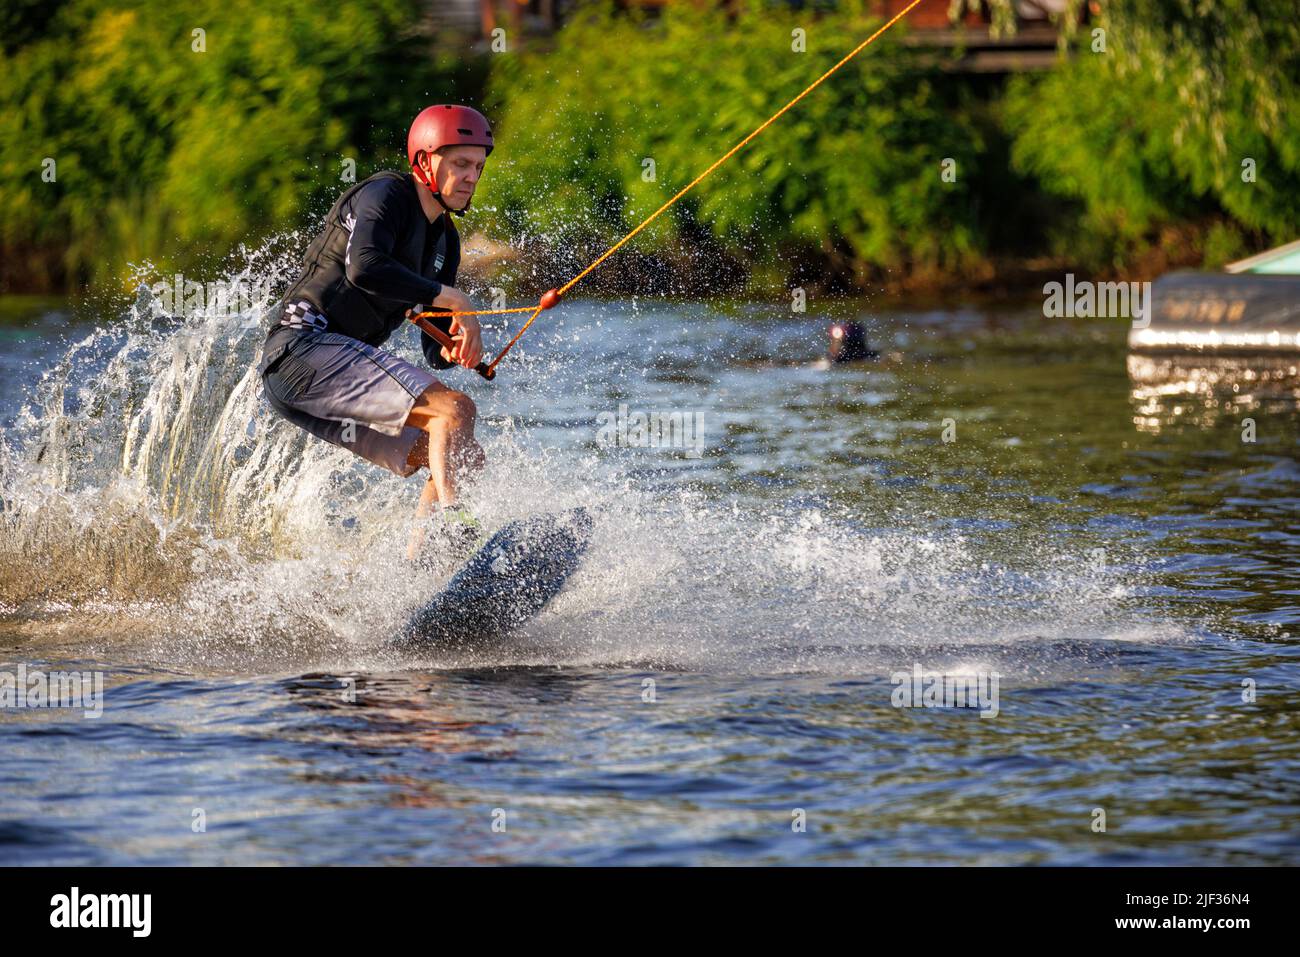 An athlete wakeboarder in a red protective helmet and a black vest raises water spray from a fast ride on a water board. 06.19.1922. Kyiv. Ukraine. Stock Photo